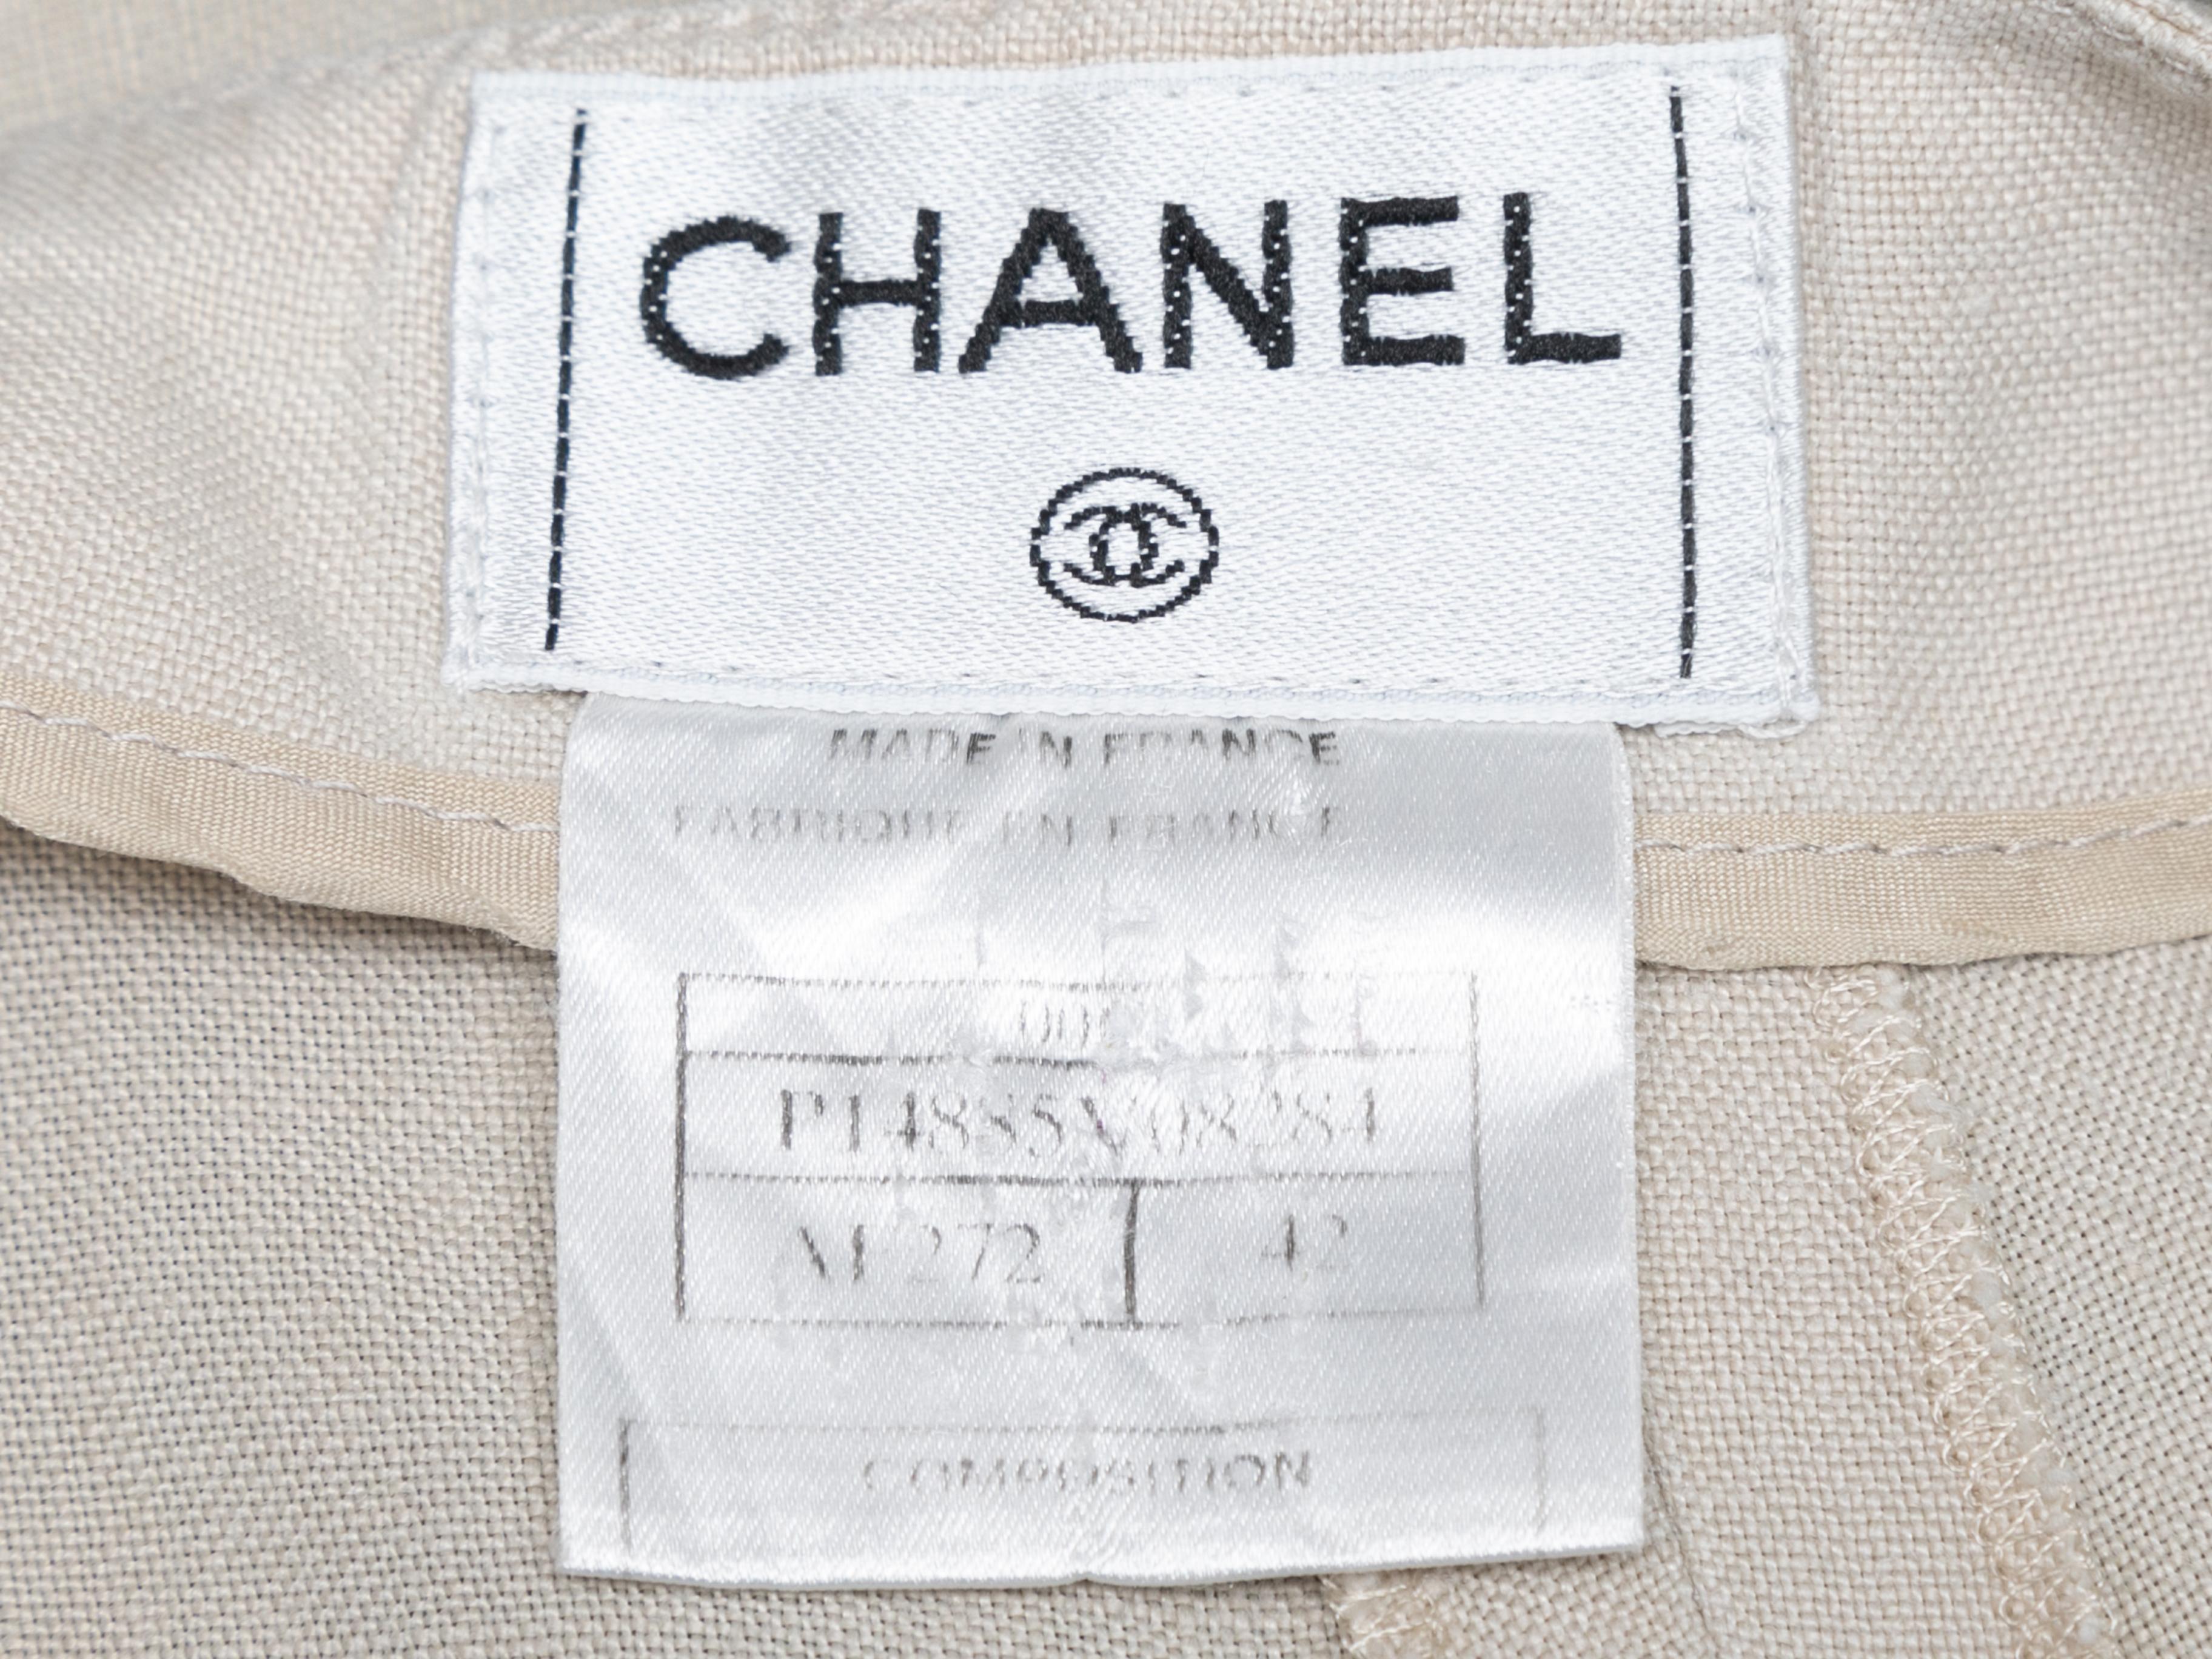 Beige linen straight-leg trousers by Chanel. Zip closure at side. 30